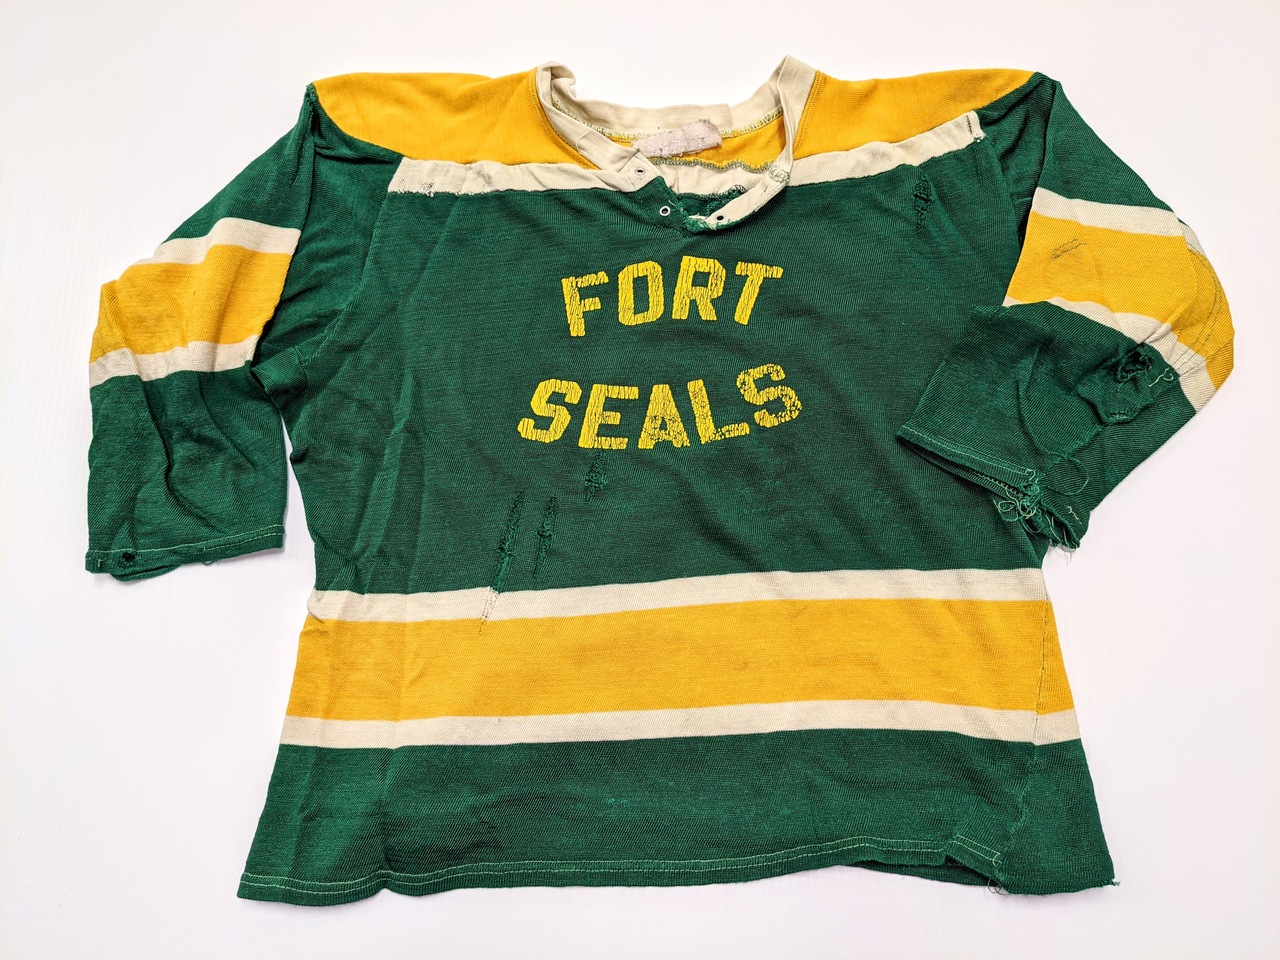 This hockey Jersey comes from the oldest Hockey Team in Fort Vermilion - The Fort Seals. Sponsored by the S. Stephens store this team dates back to the 1940's. The Jersey is small in stature with short sleeves and  wide dimensions typical of a goalie jersey to accommodate extra padding. We do not have information on the significance of the name "Seals"

05/07/2021
2020.59.23/ Smith Louise